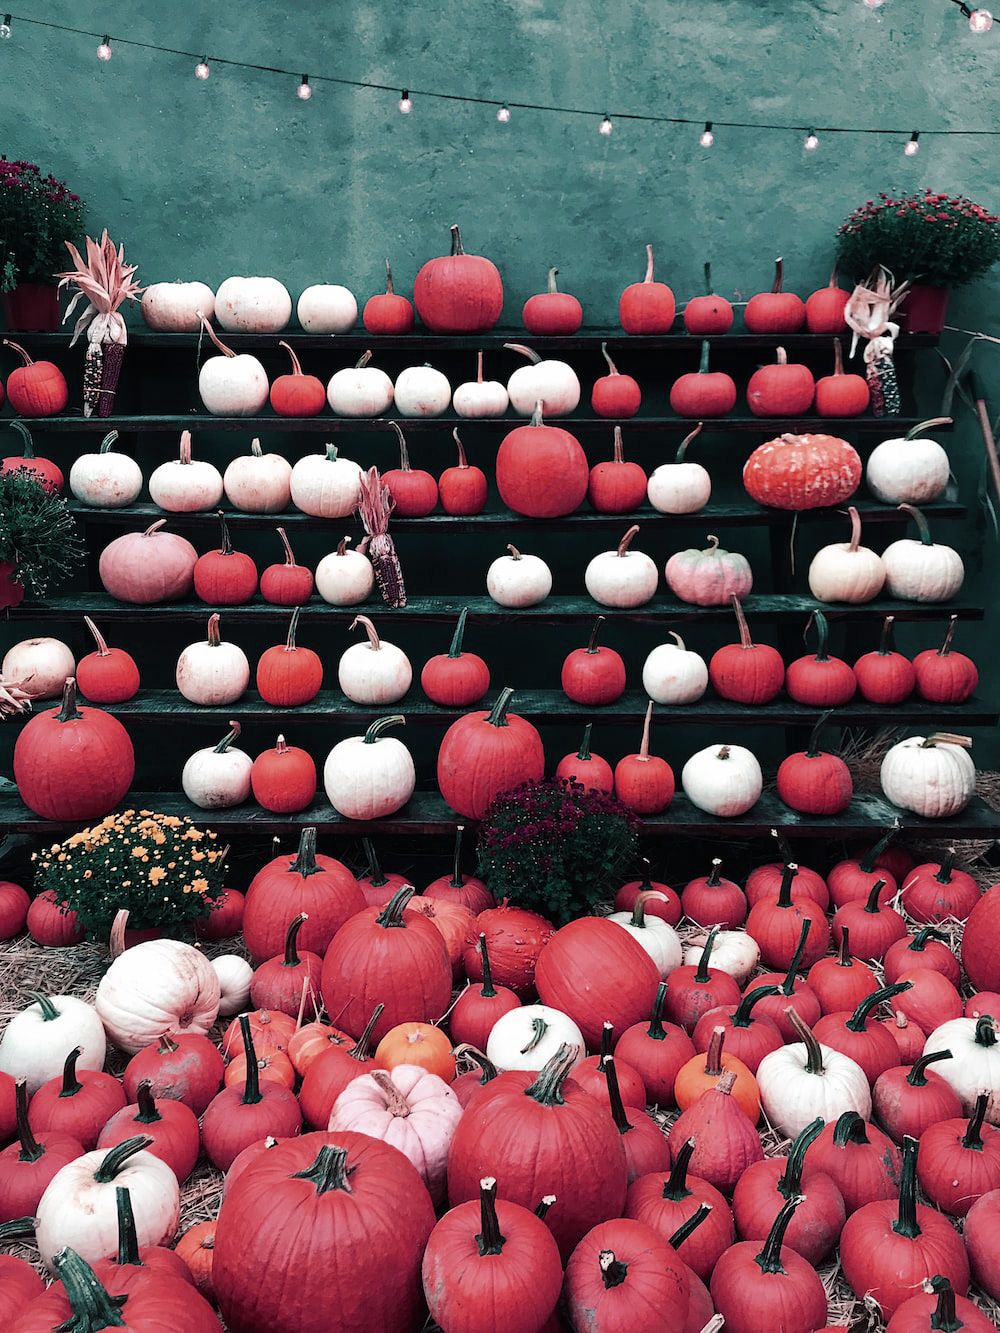 A display of red and white pumpkins on shelves. - Cozy, pumpkin